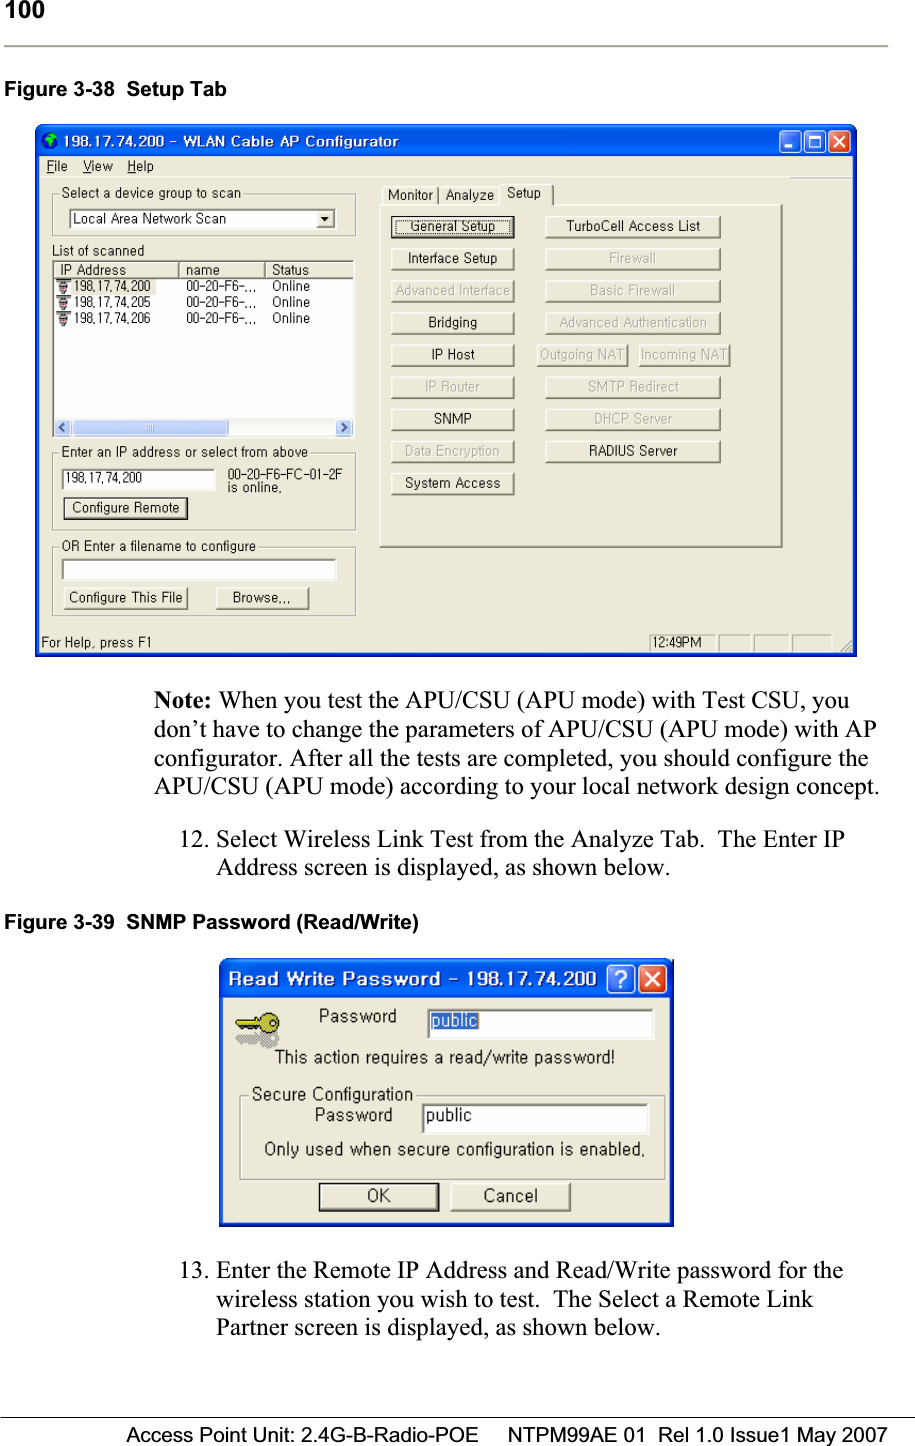 100 Access Point Unit: 2.4G-B-Radio-POE     NTPM99AE 01  Rel 1.0 Issue1 May 2007Figure 3-38  Setup Tab Note: When you test the APU/CSU (APU mode) with Test CSU, you don’t have to change the parameters of APU/CSU (APU mode) with AP configurator. After all the tests are completed, you should configure the APU/CSU (APU mode) according to your local network design concept. 12. Select Wireless Link Test from the Analyze Tab.  The Enter IP Address screen is displayed, as shown below. Figure 3-39  SNMP Password (Read/Write) 13. Enter the Remote IP Address and Read/Write password for the wireless station you wish to test.  The Select a Remote Link Partner screen is displayed, as shown below. 